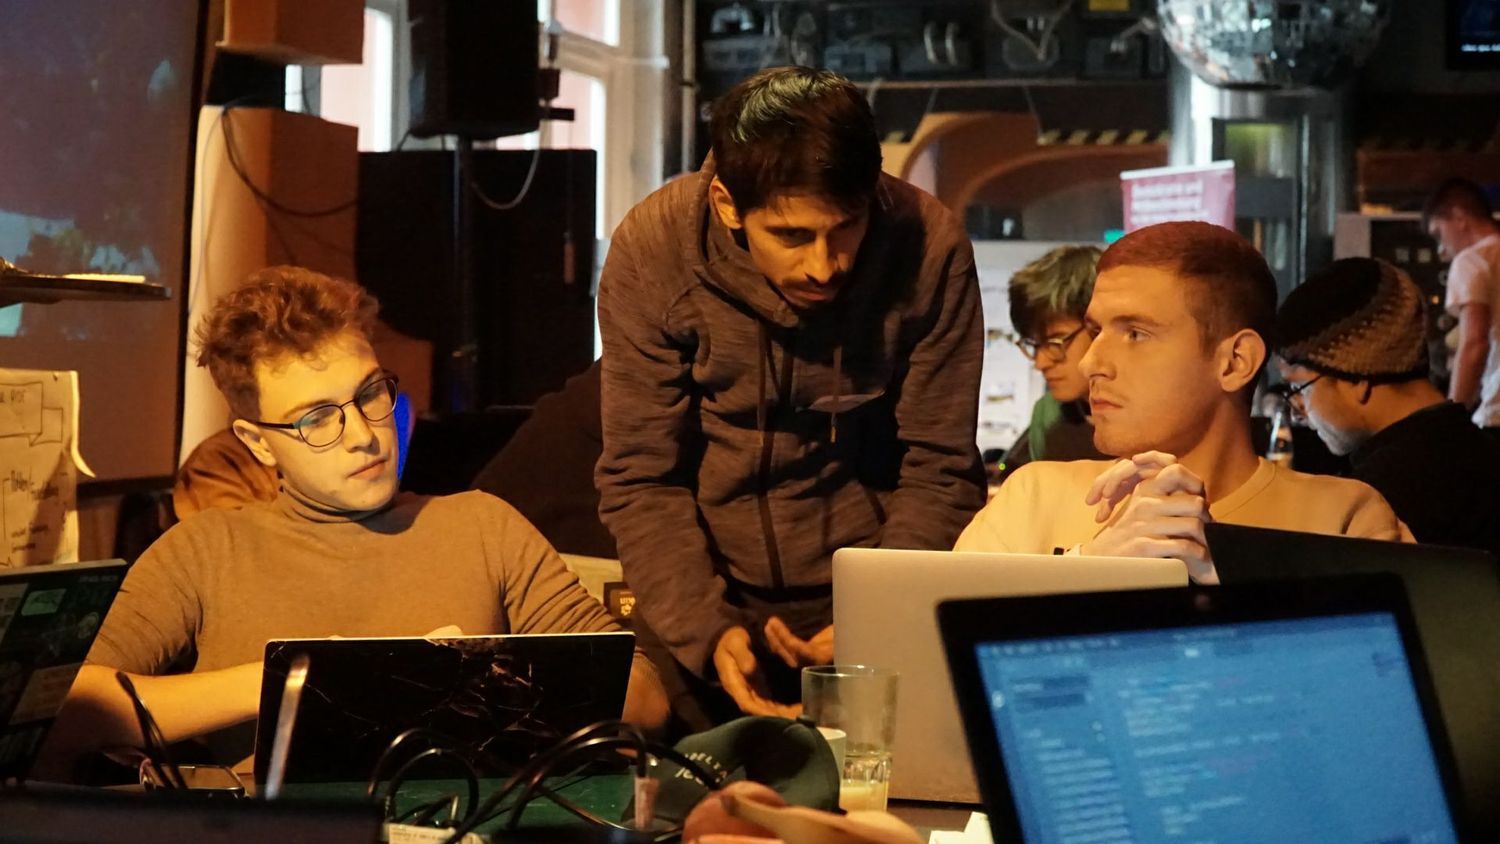 Team working on the project during the hackathon